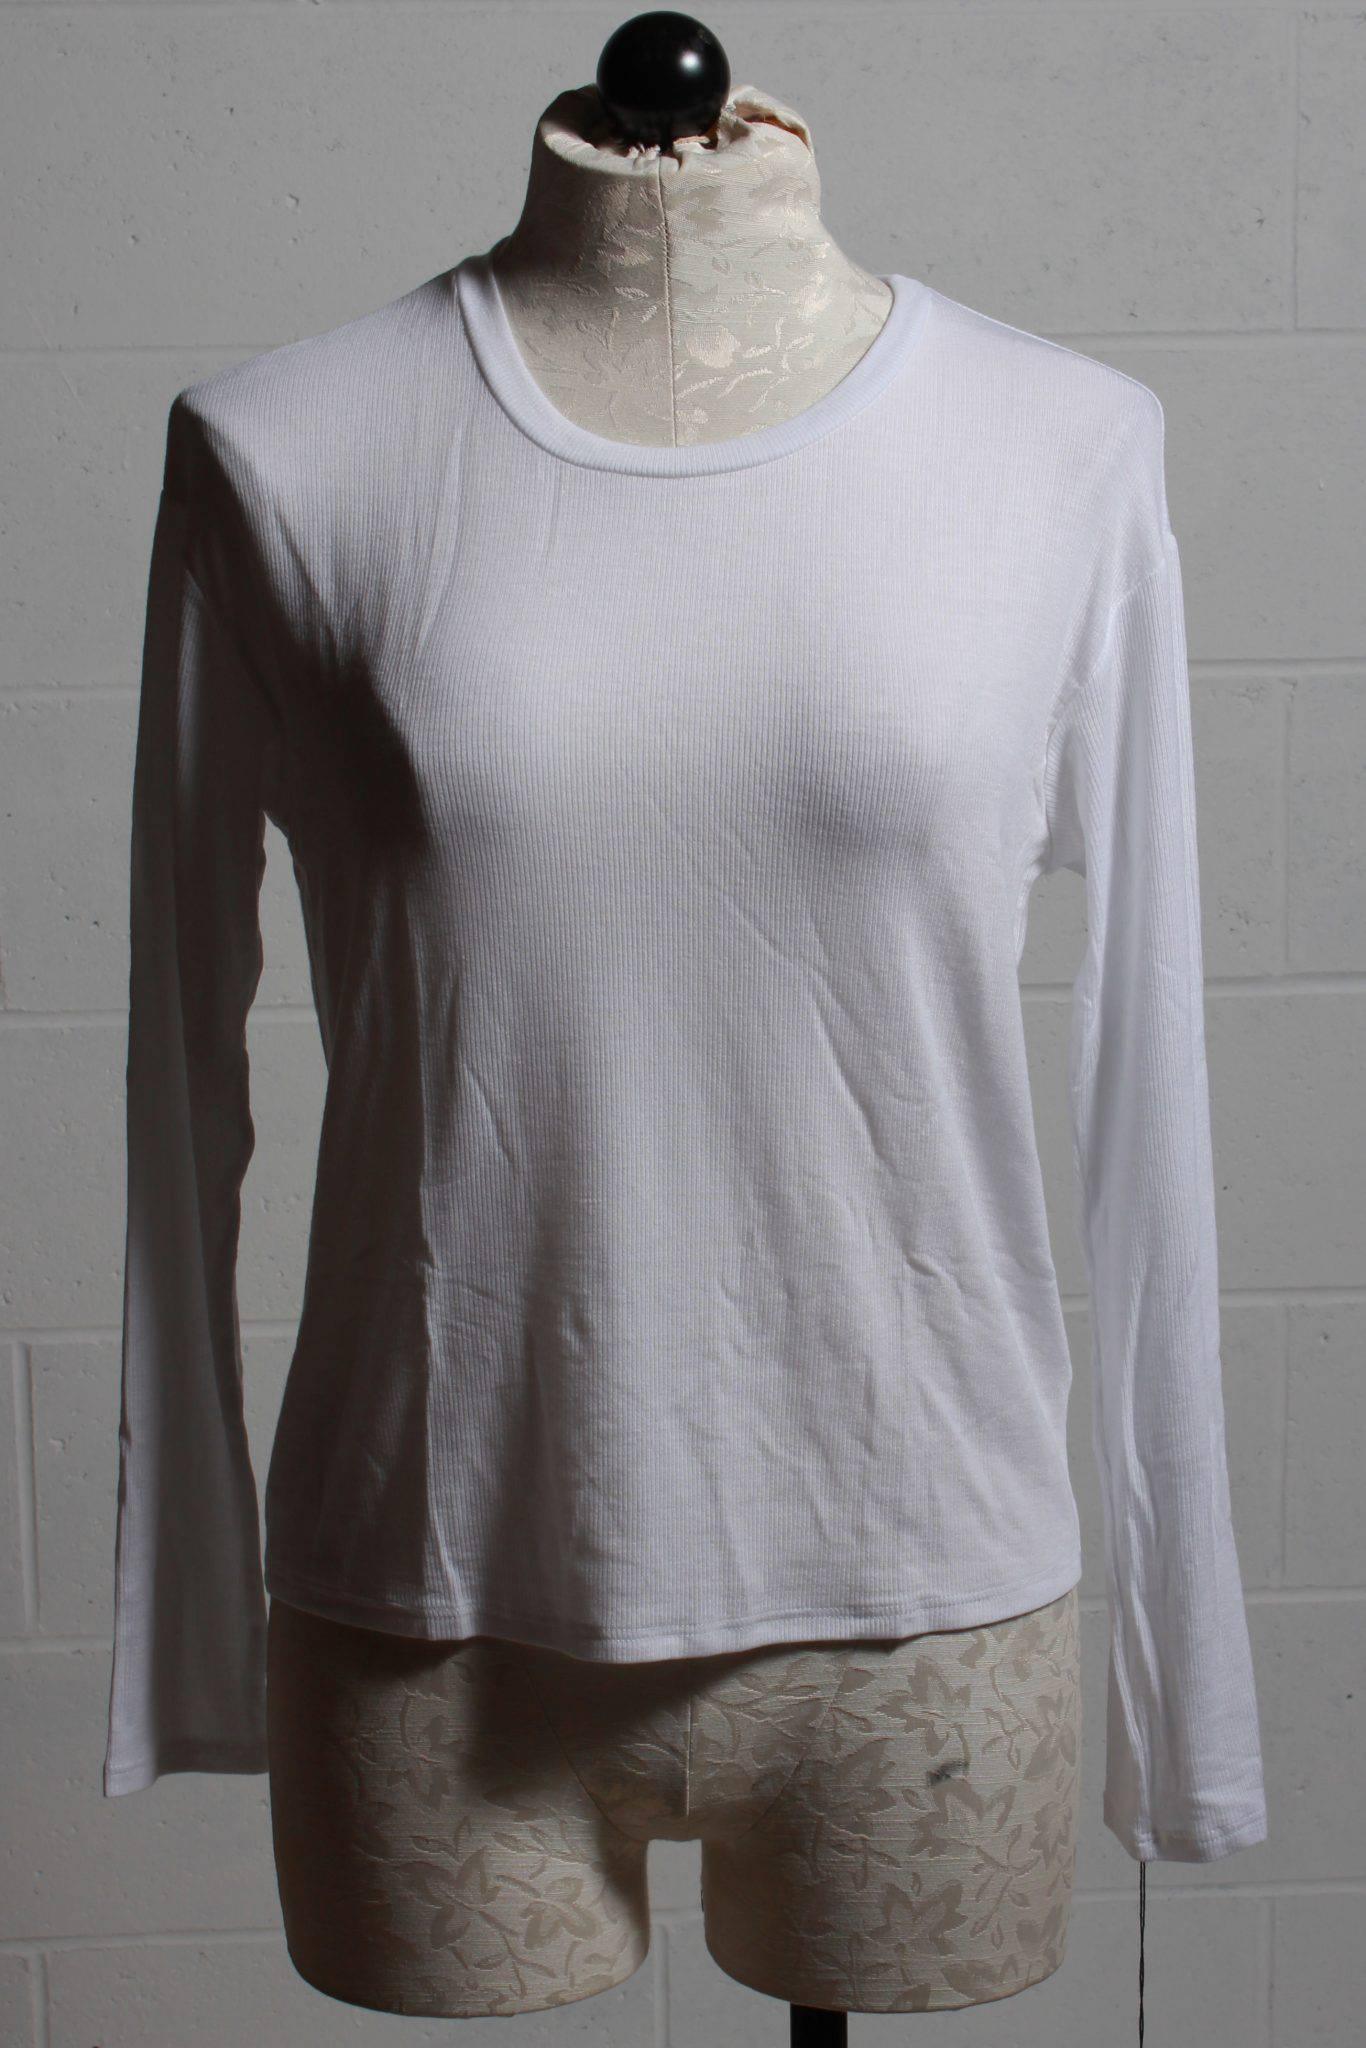 white long sleeve tee shirt in our "Favorite" Featherweight Ribbed fabric